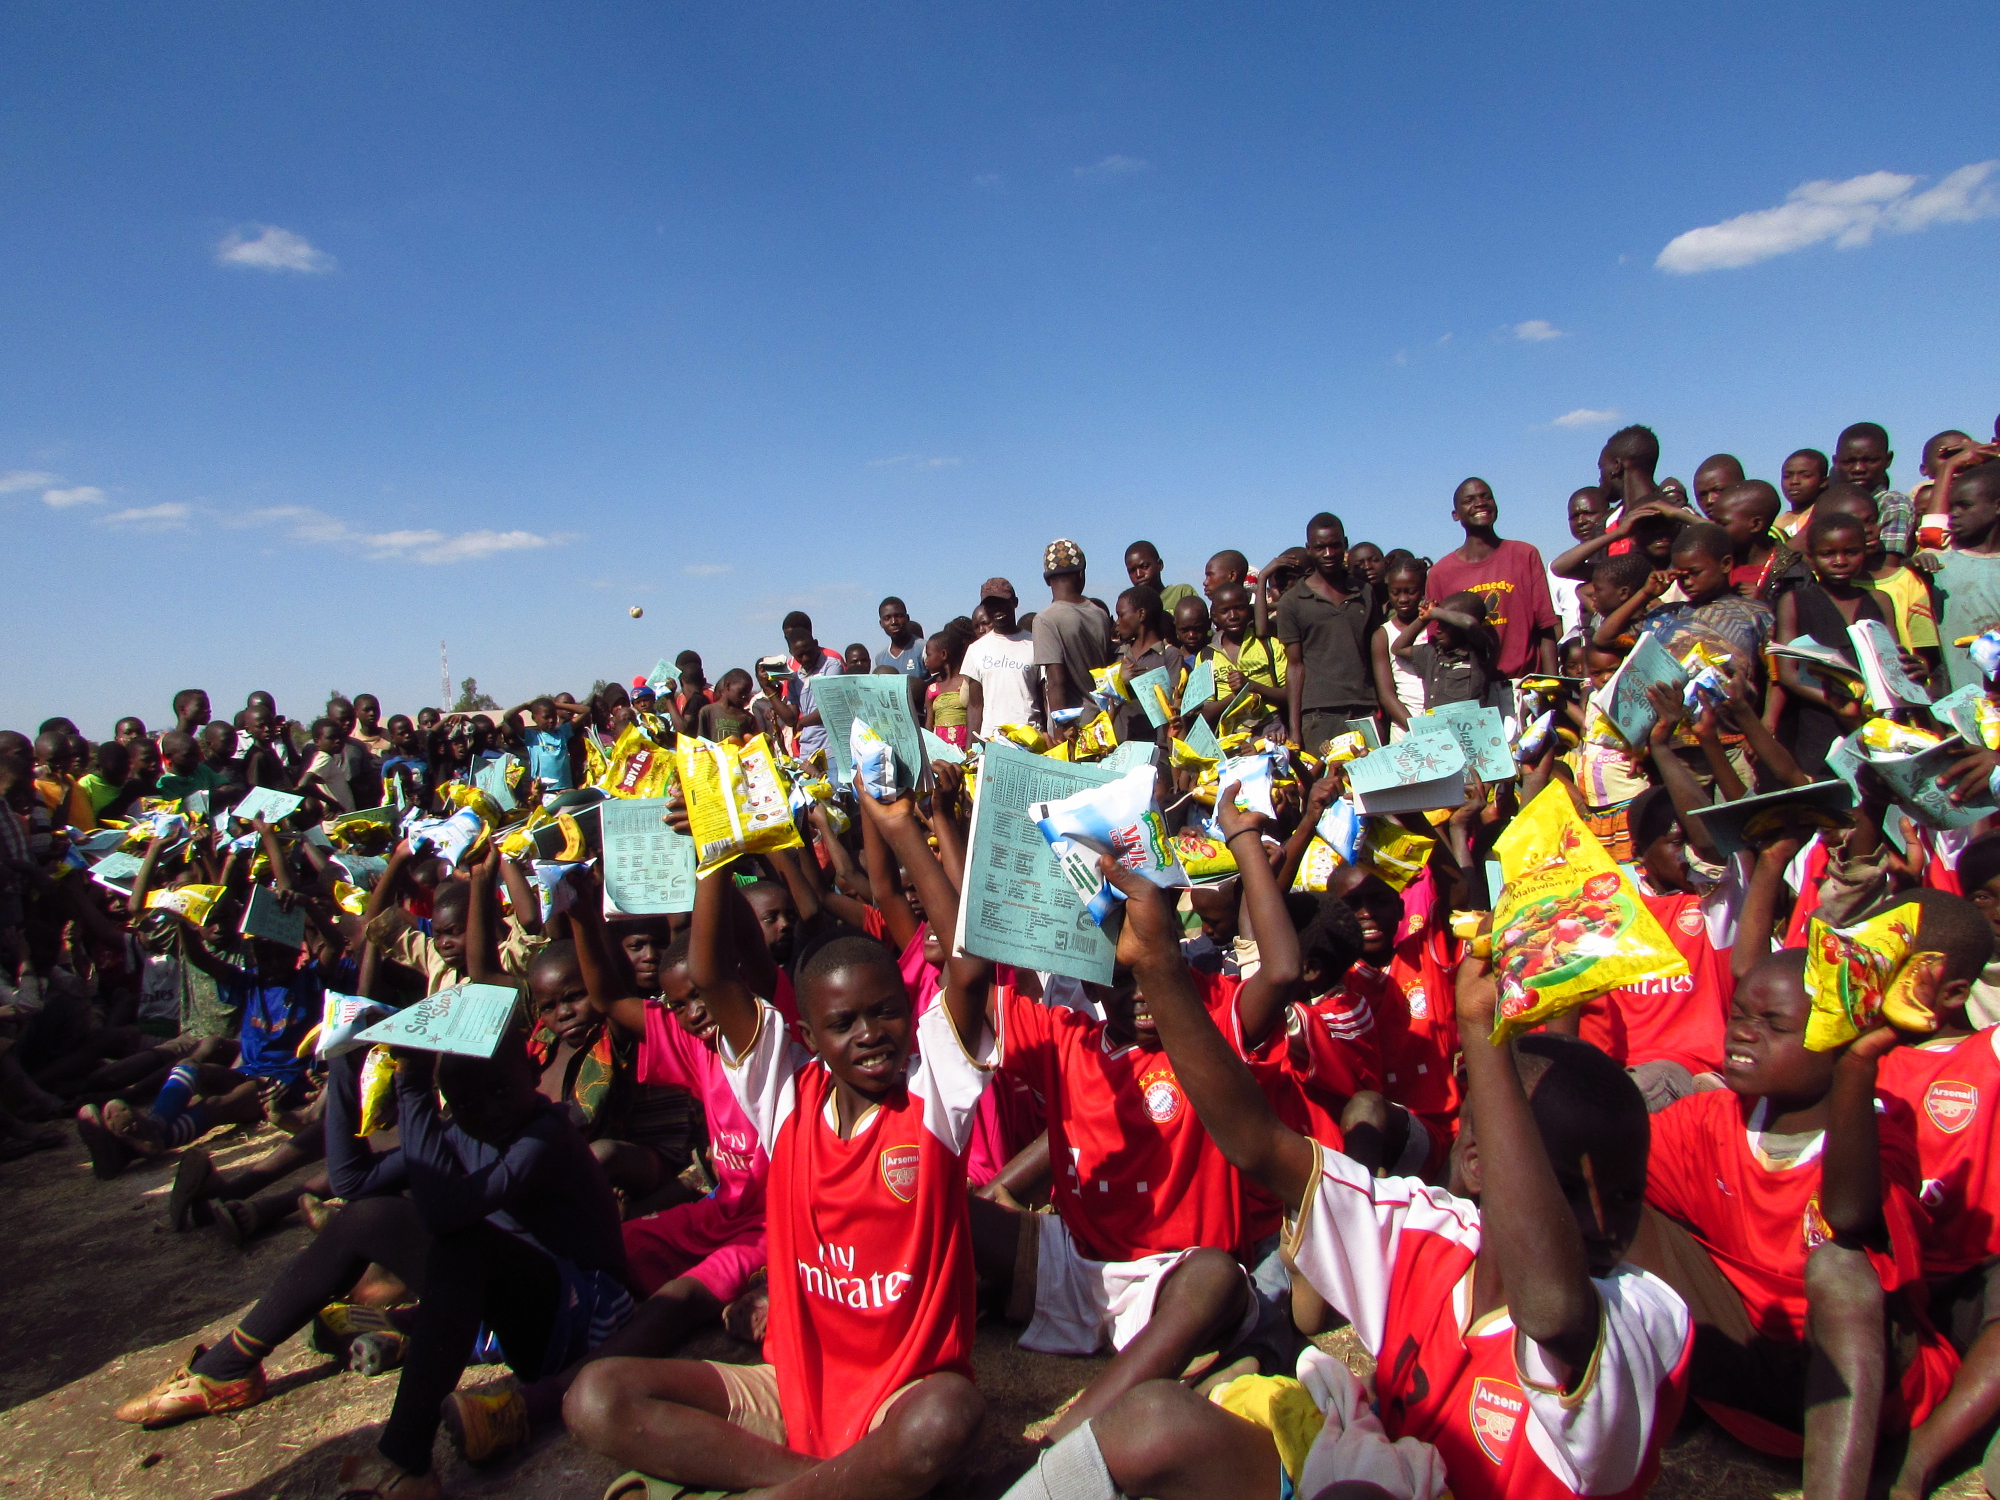 Malawian football supporters at a cup match